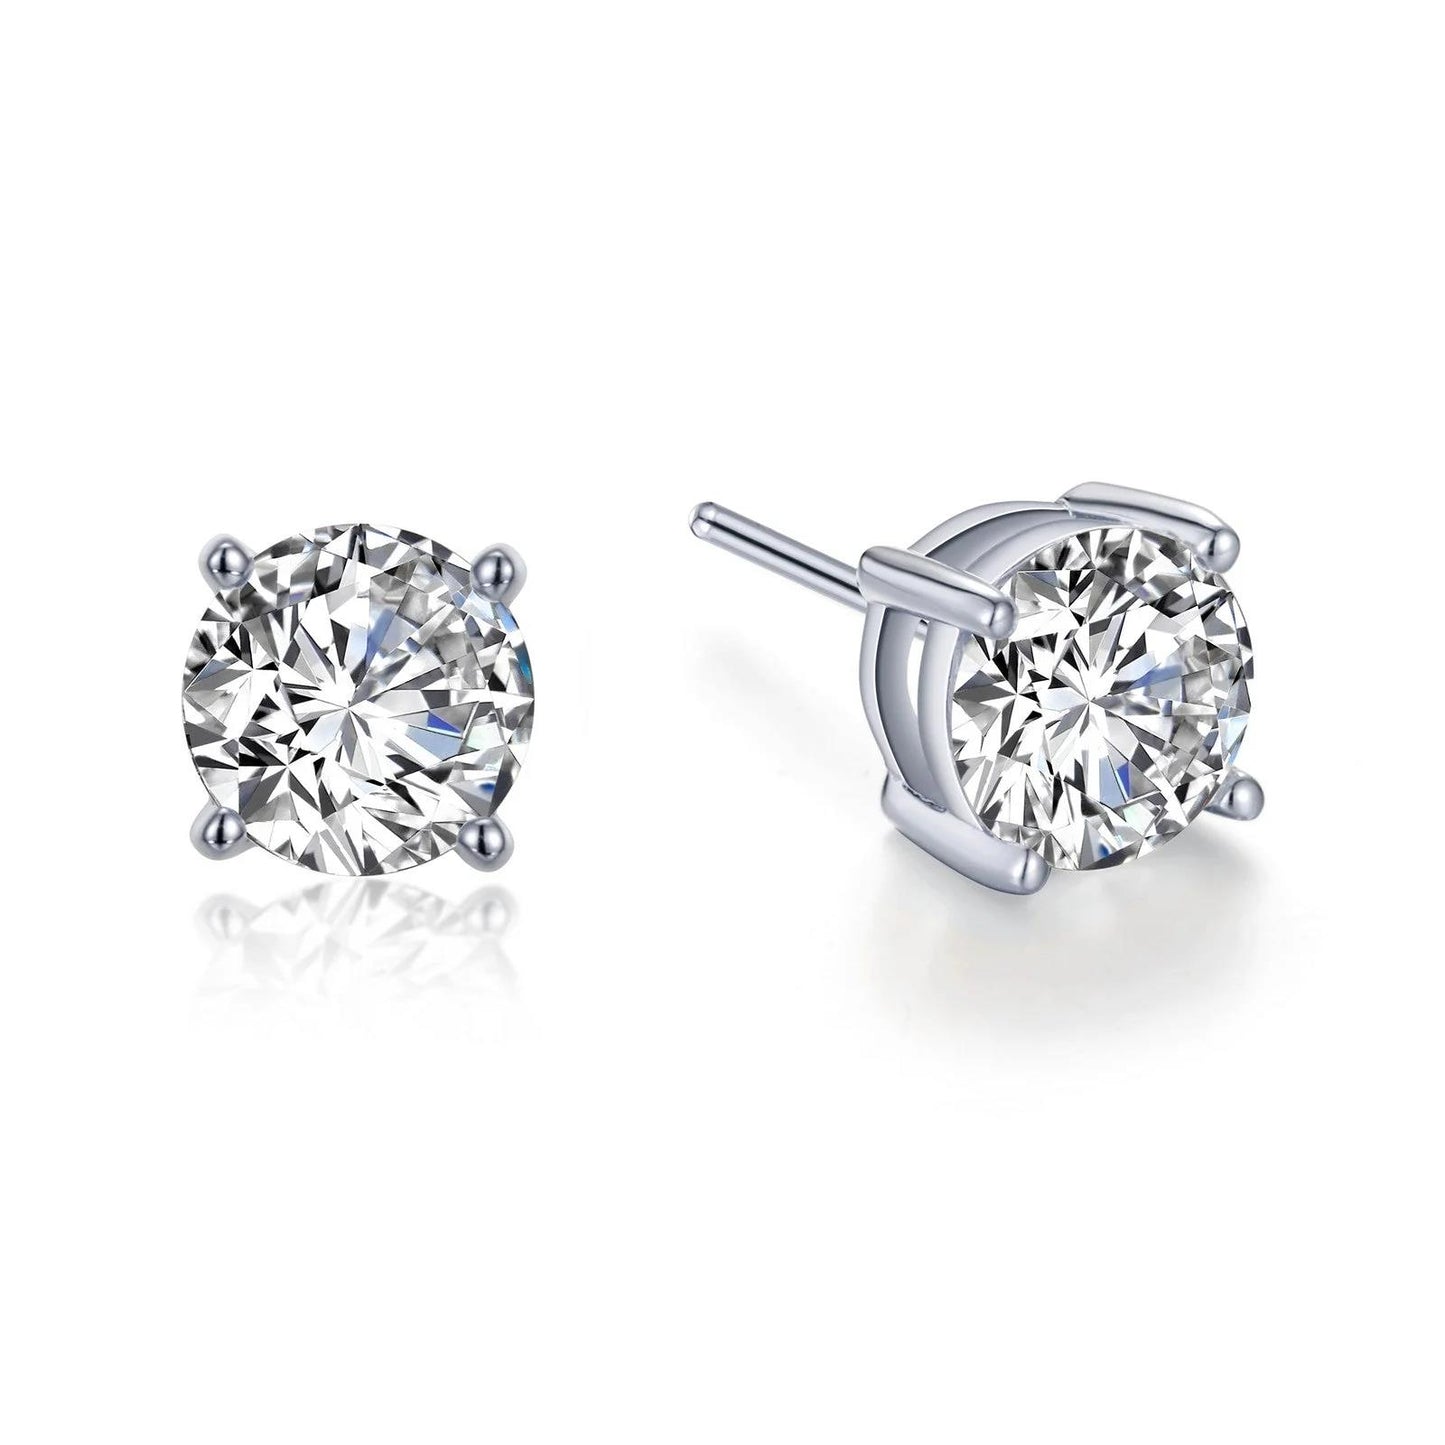 Solitaire Simulated Stud Earrings